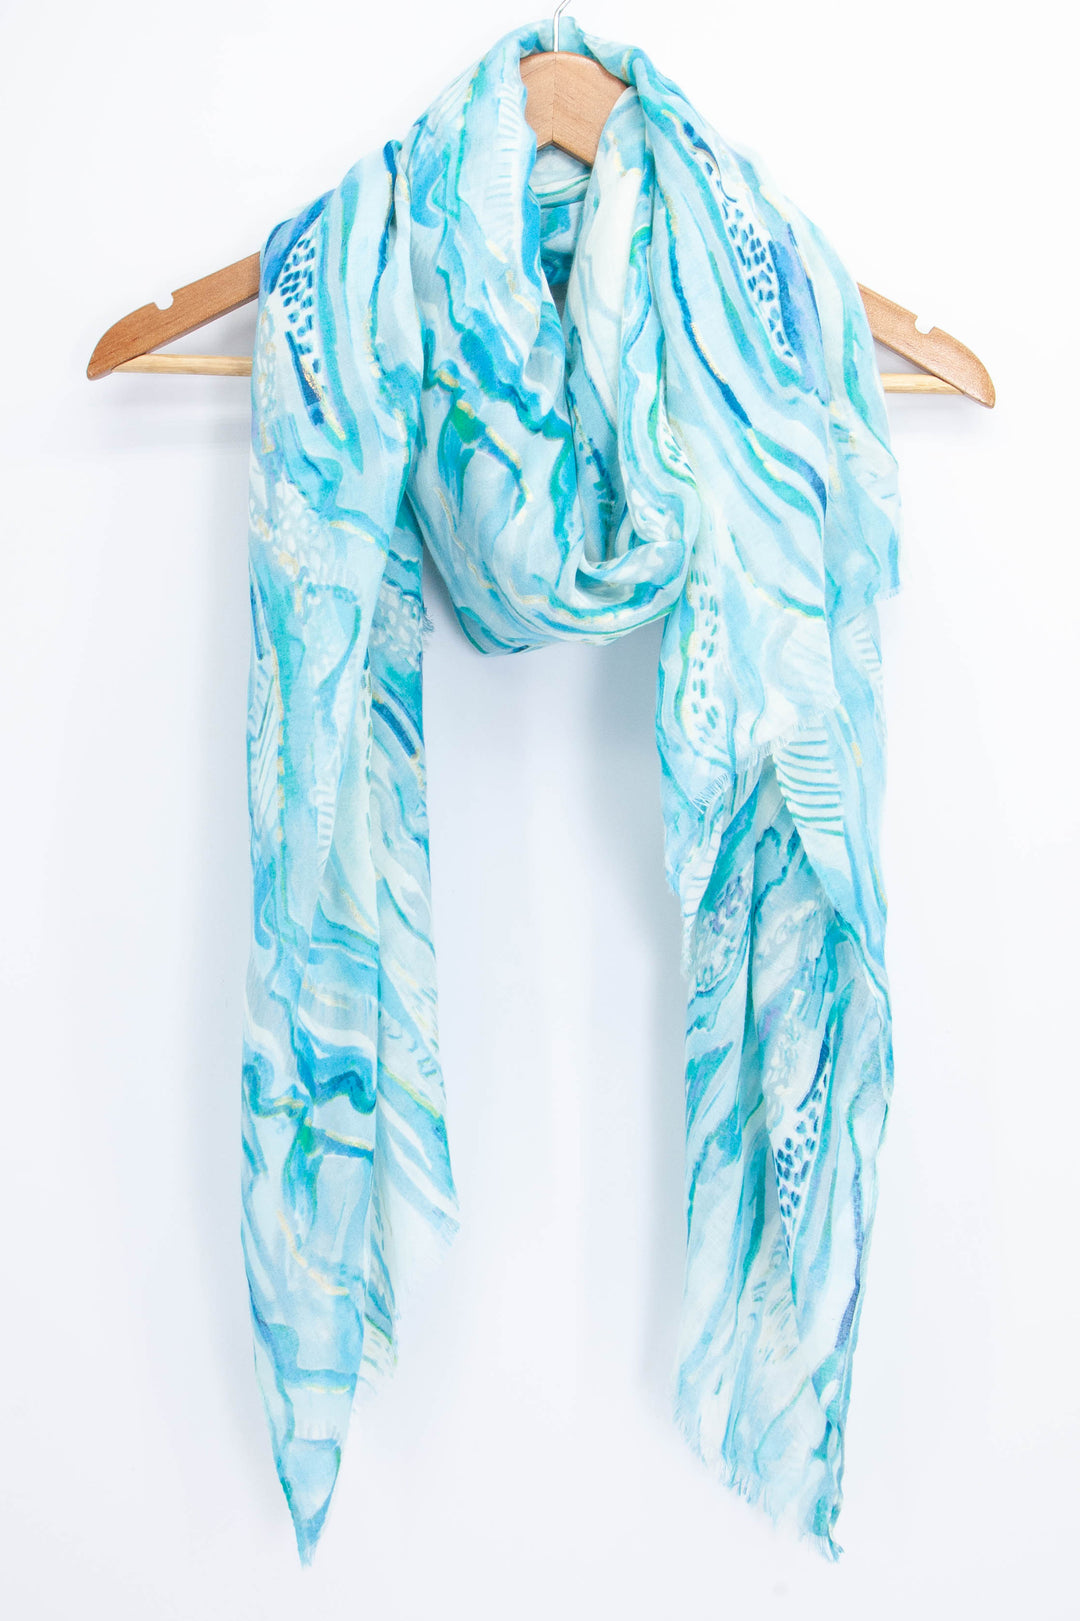 light blue wave pattern scarf with gold foil accents draped around a coat hanger